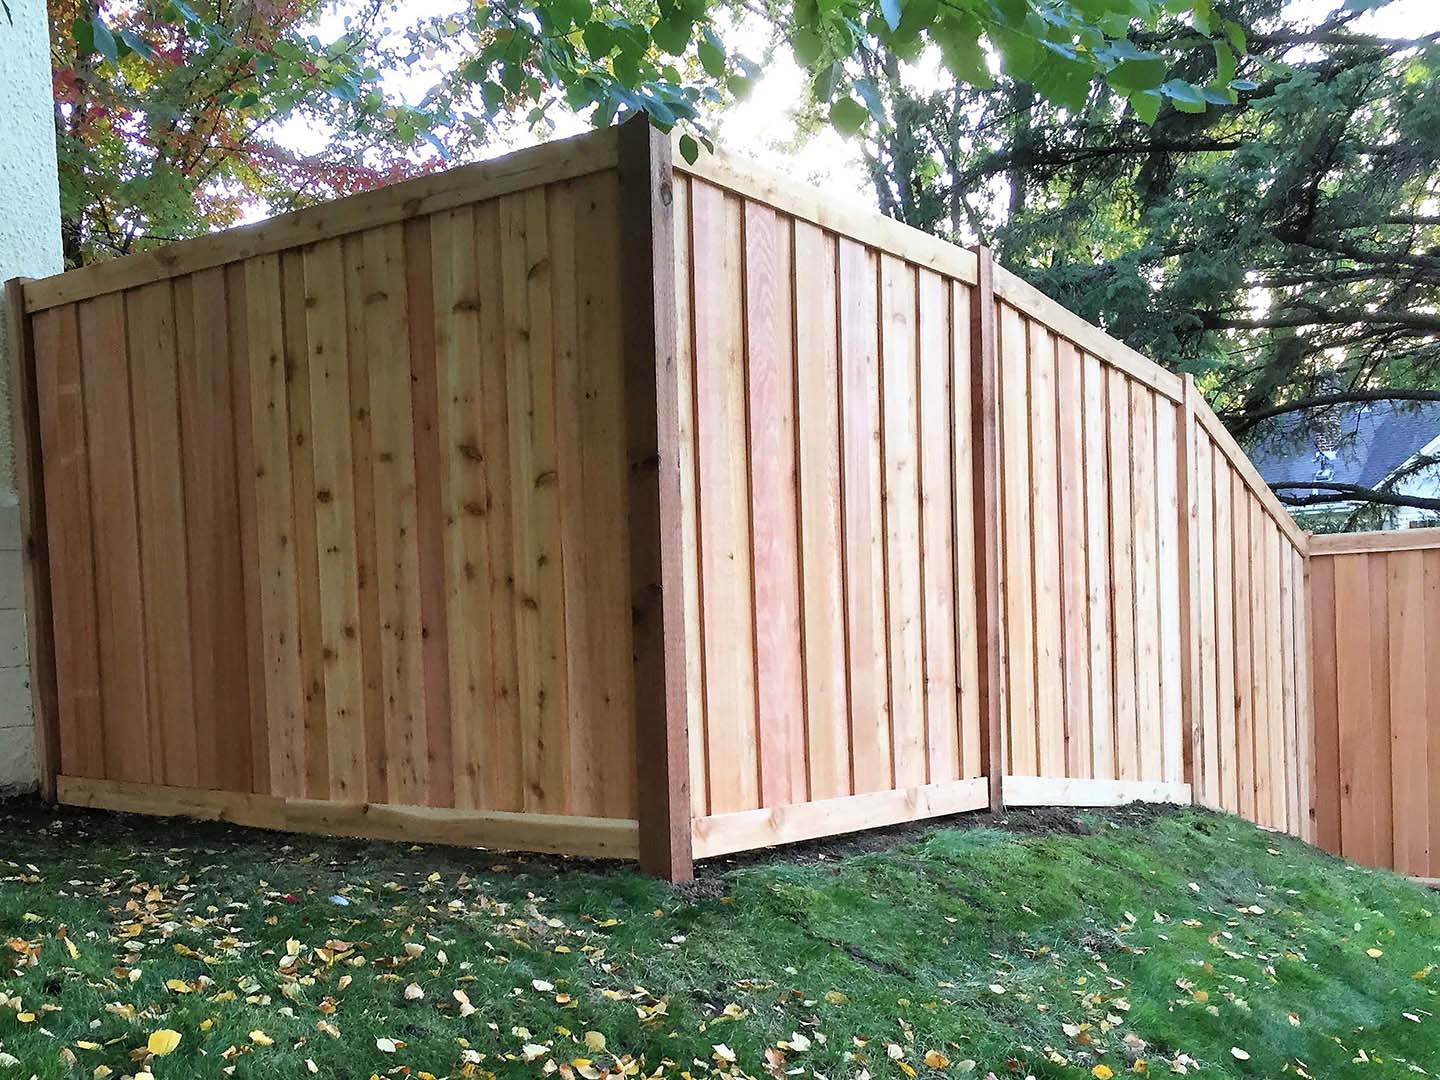 Blaine MN cap and trim style wood fence